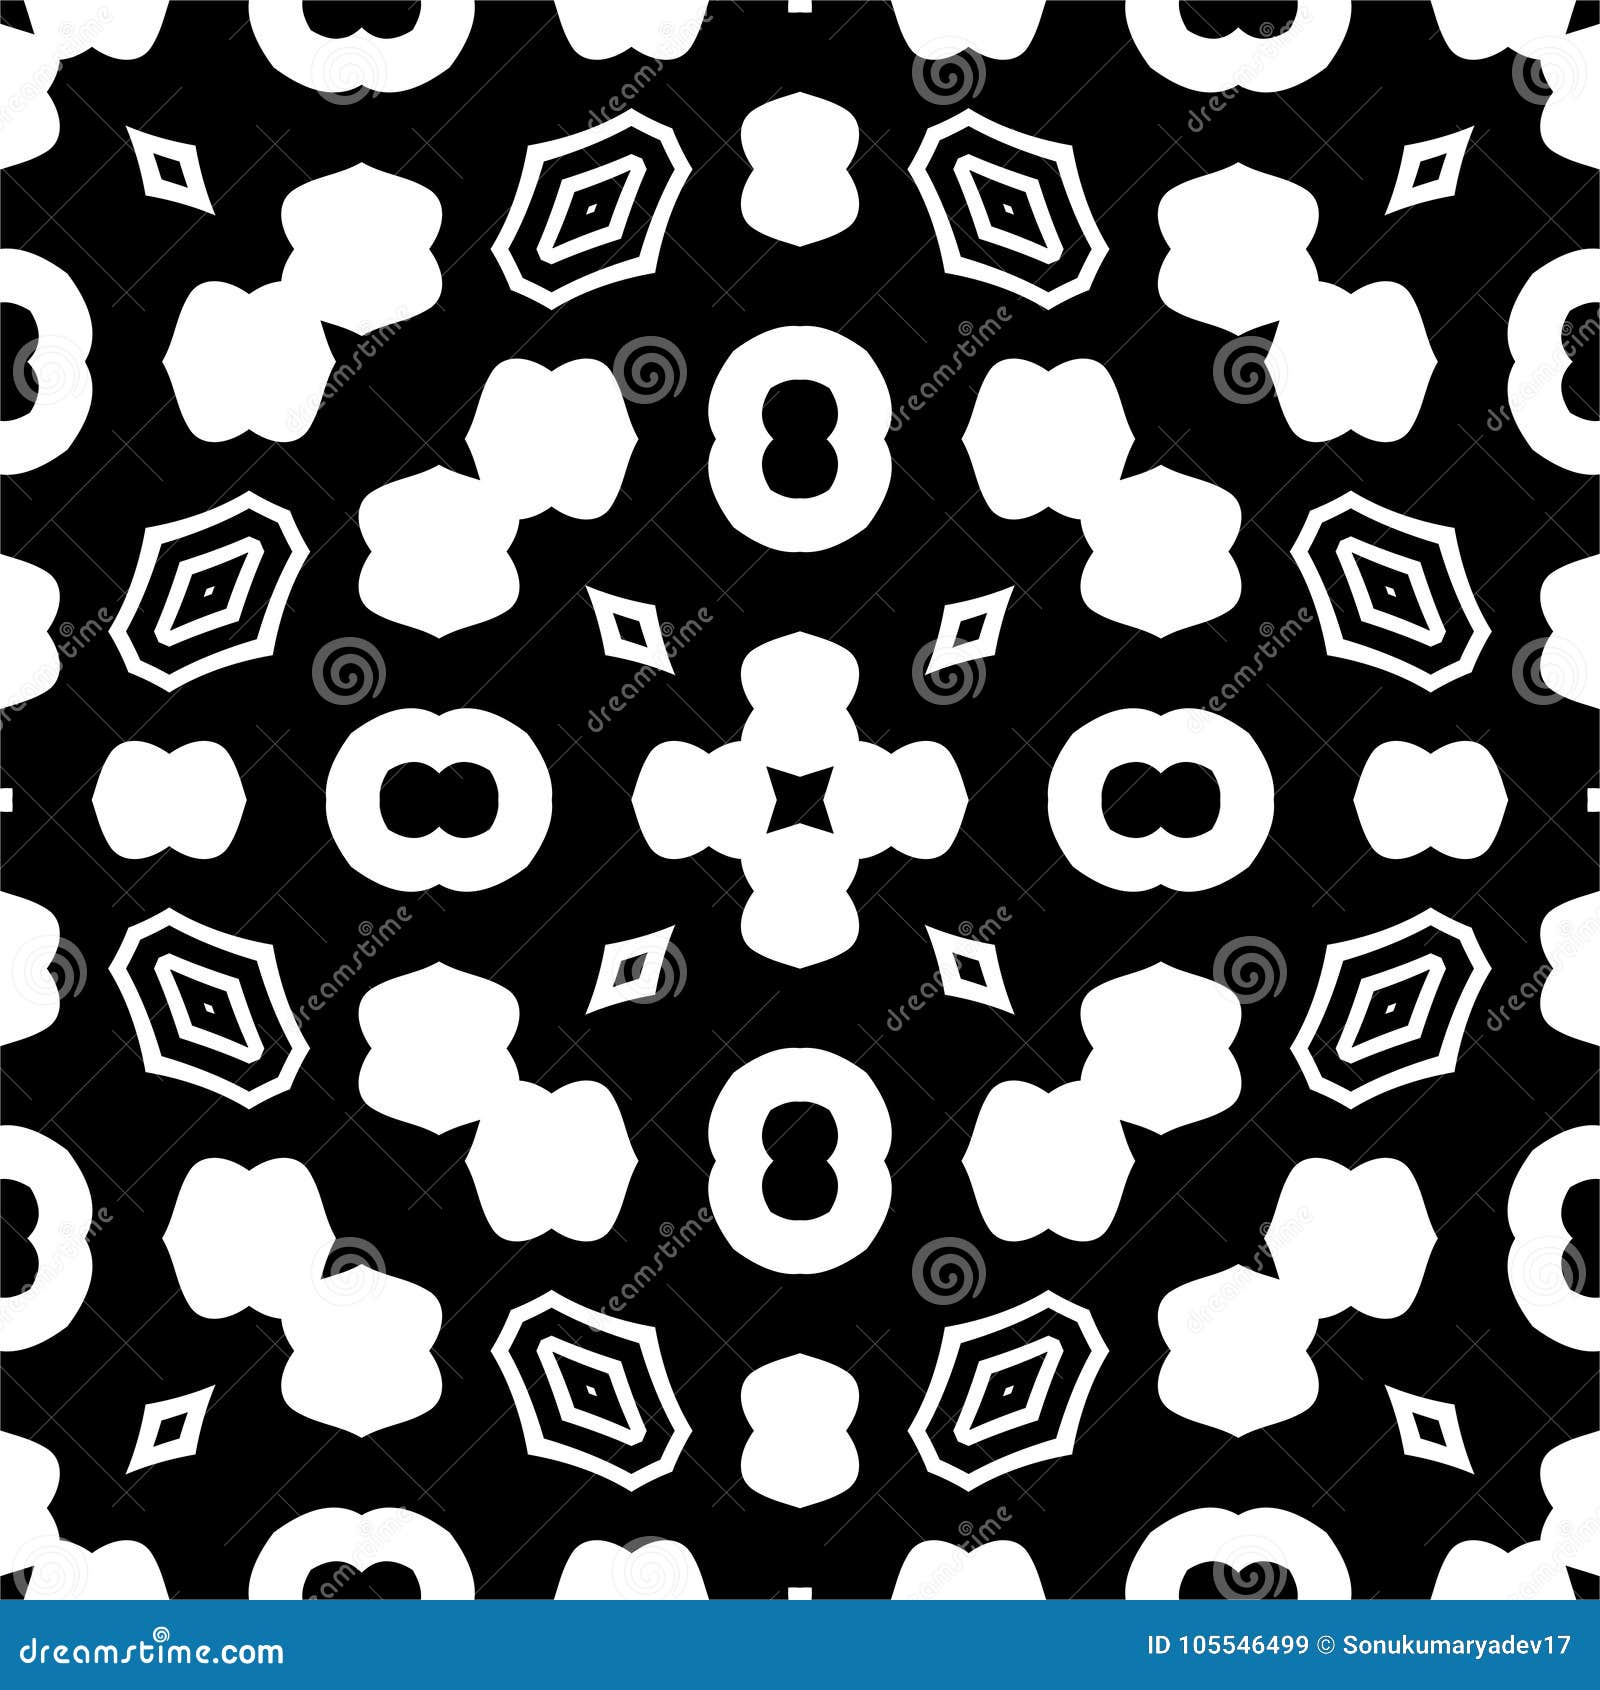 Black ABSTRACT seamless pattern in white background